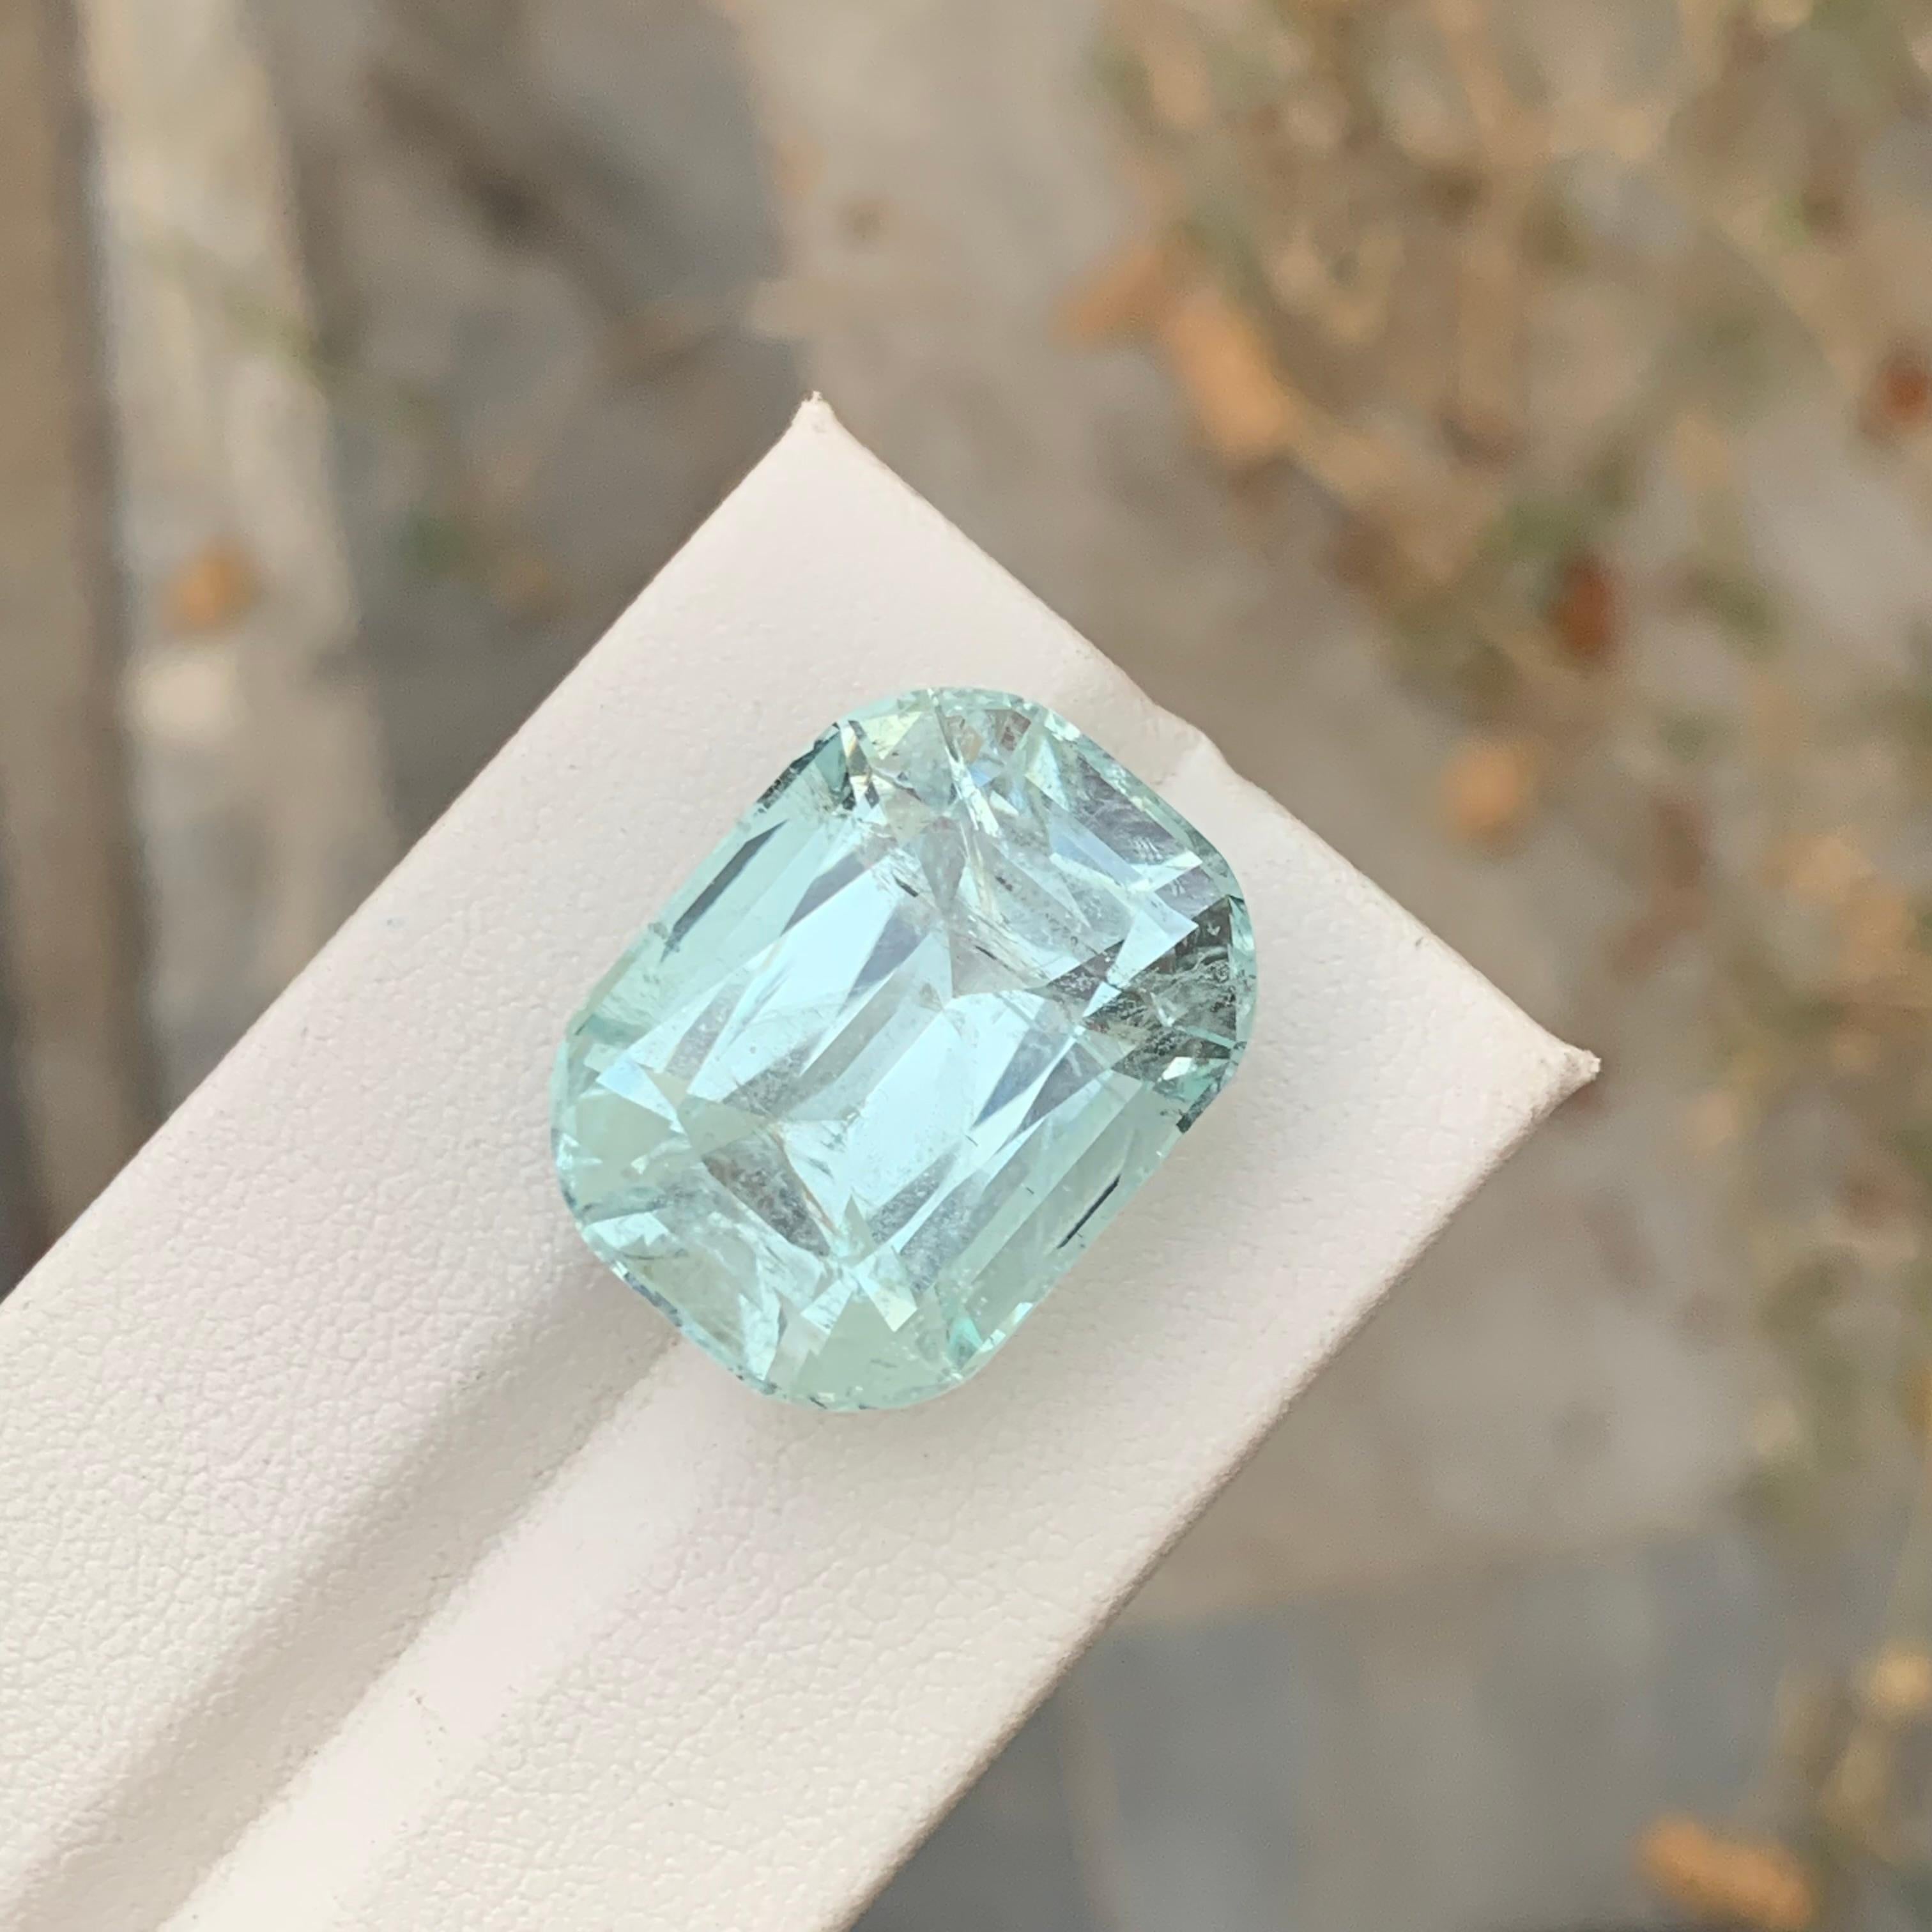 29.75 Carats Gigantic Natural Loose Aquamarine Included Gem For Necklace Jewelry For Sale 4